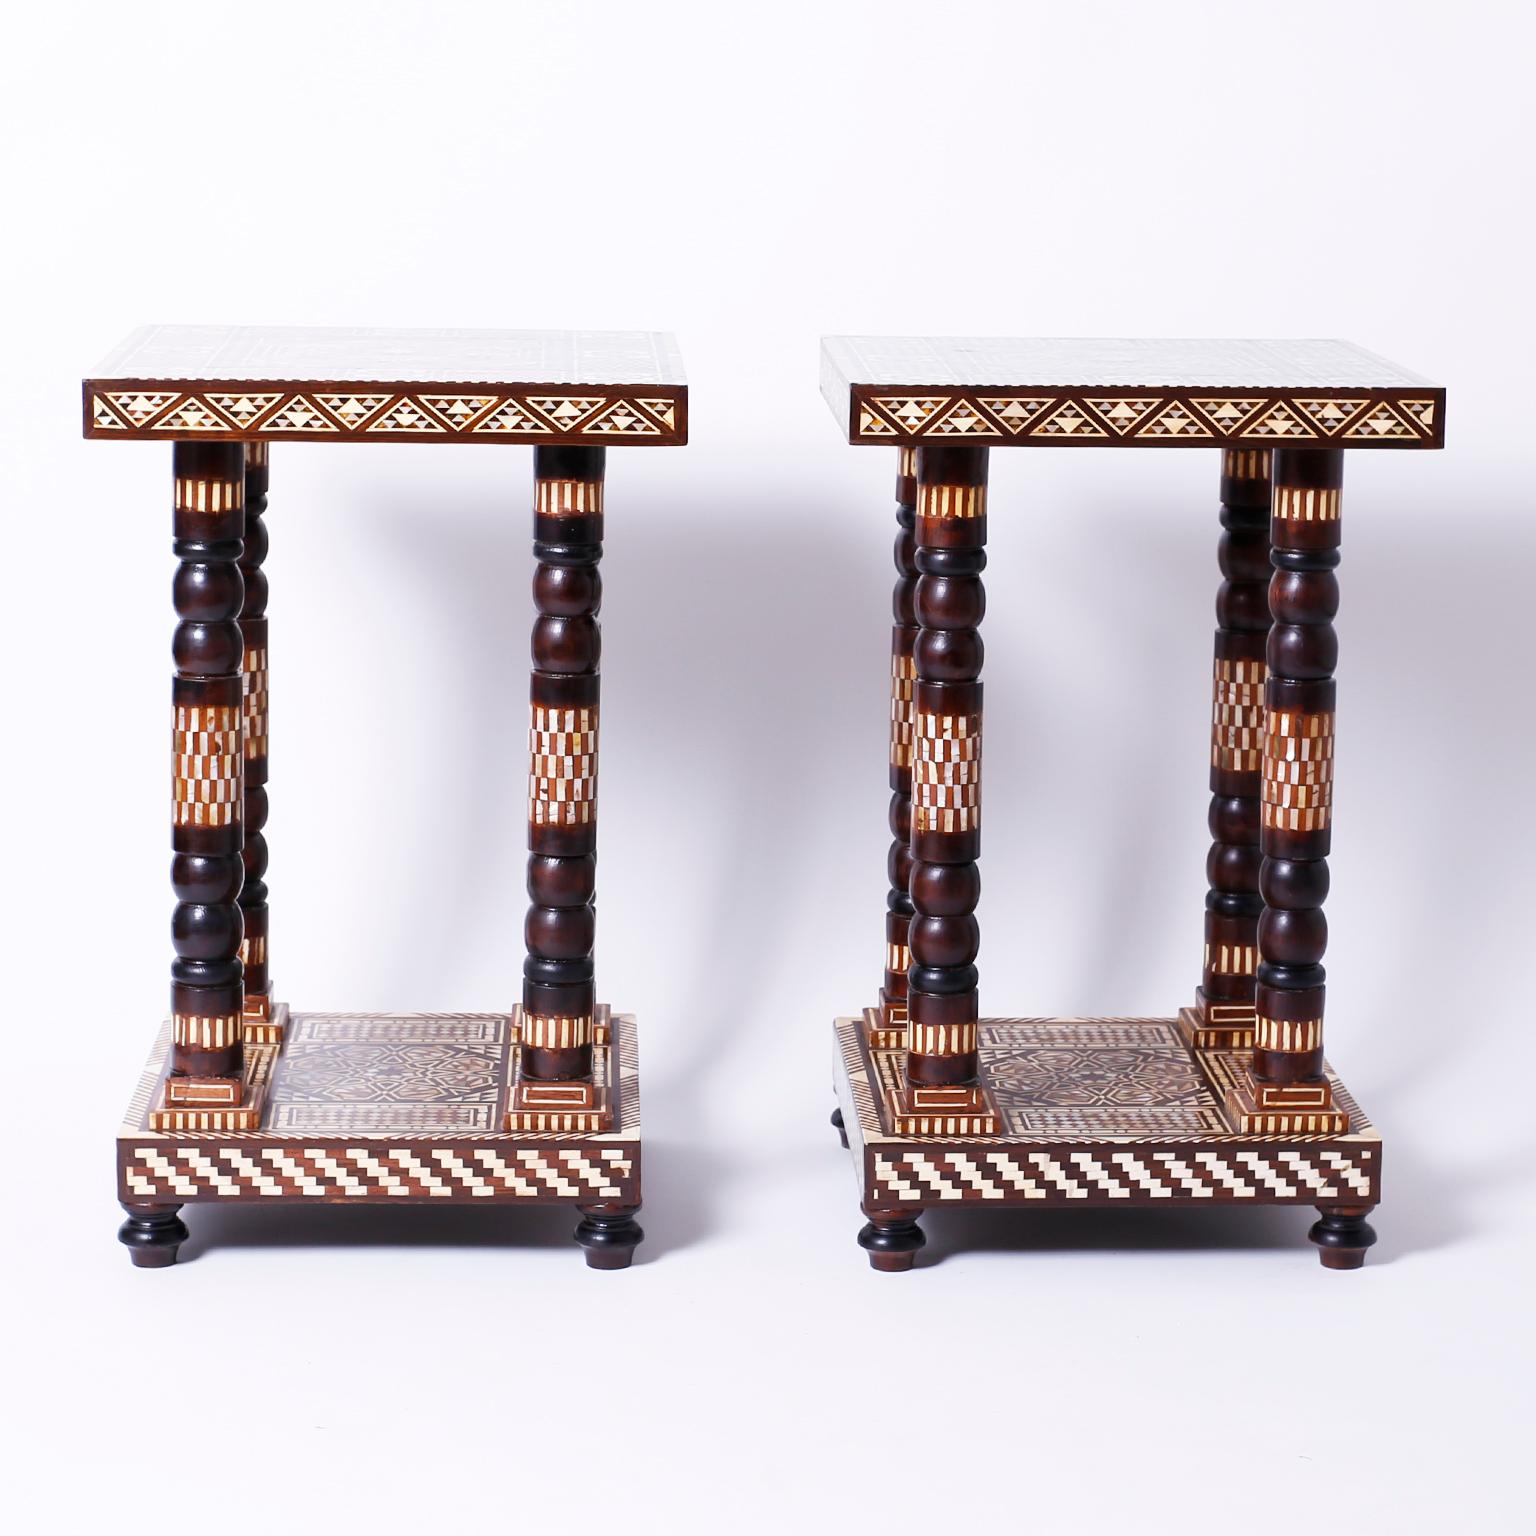 Pair of Moroccan tables or stands with square tops decorated with inlaid mother of pearl, tortoise, bone and exotic hardwoods, supported by four turned and inlaid columns on an inlaid base with turned feet.